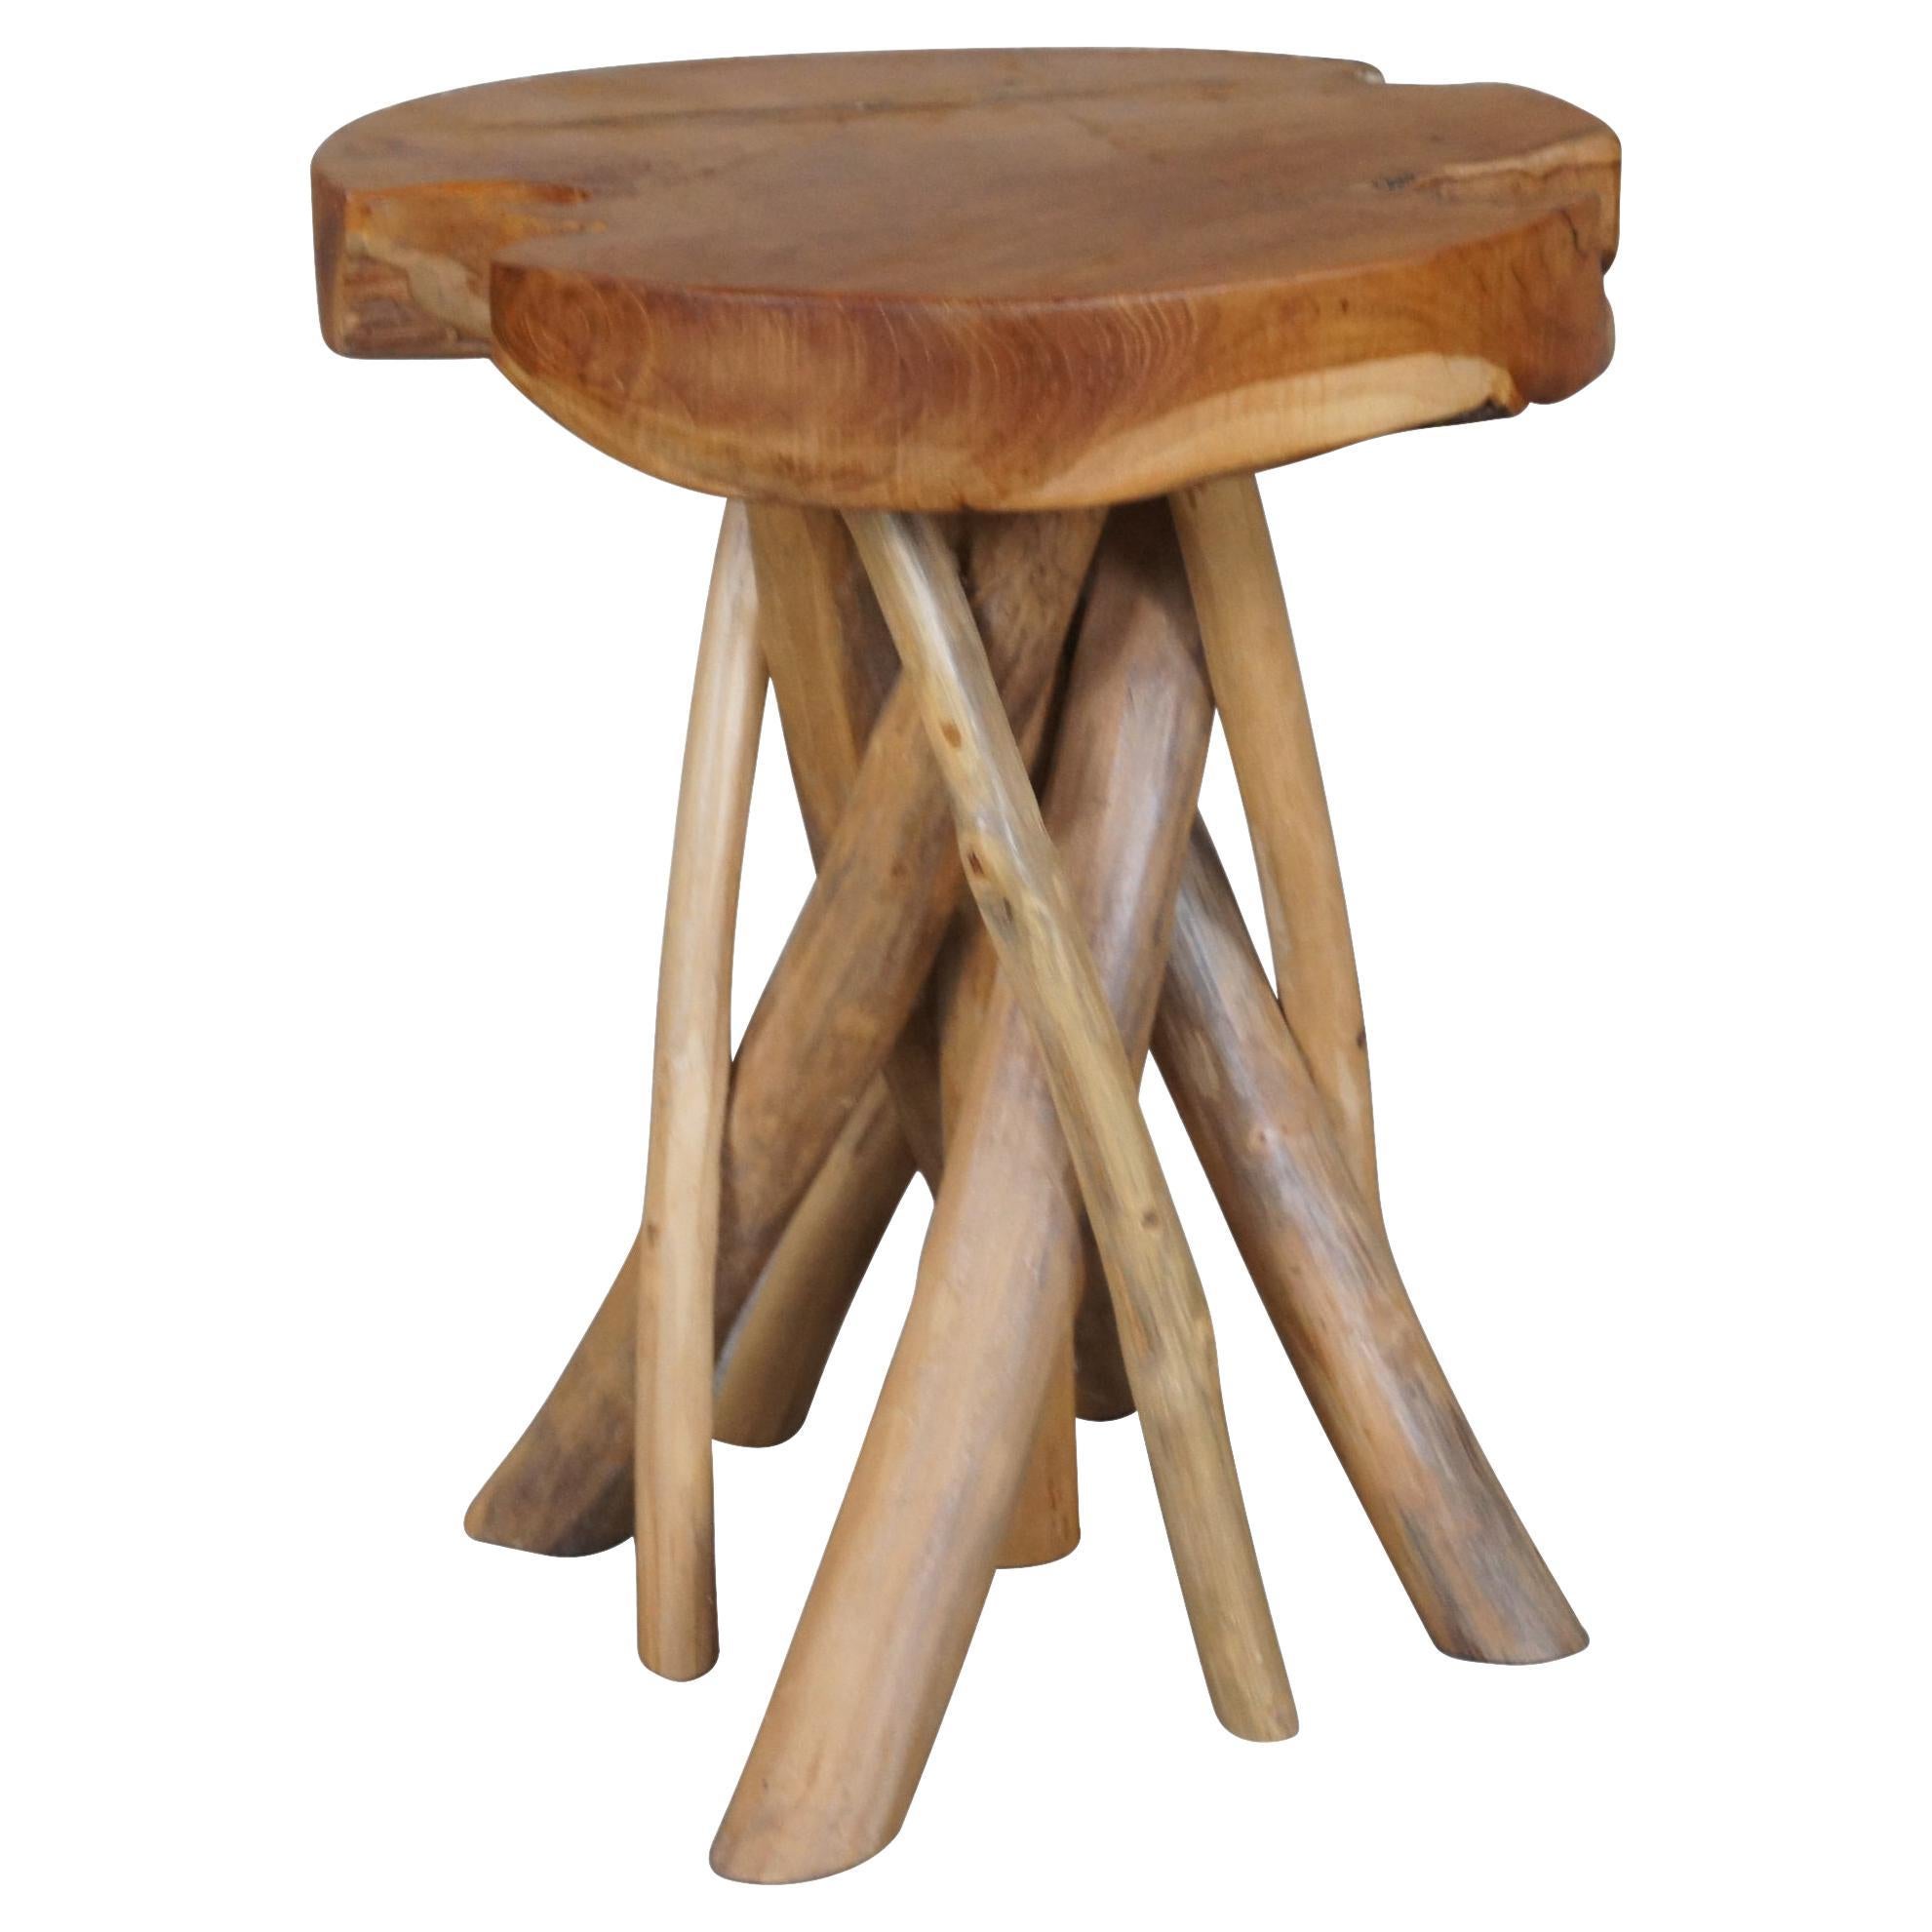 Rustic Adirondack Farmhouse Country Scalloped Slab Side Table Branch Base Stool